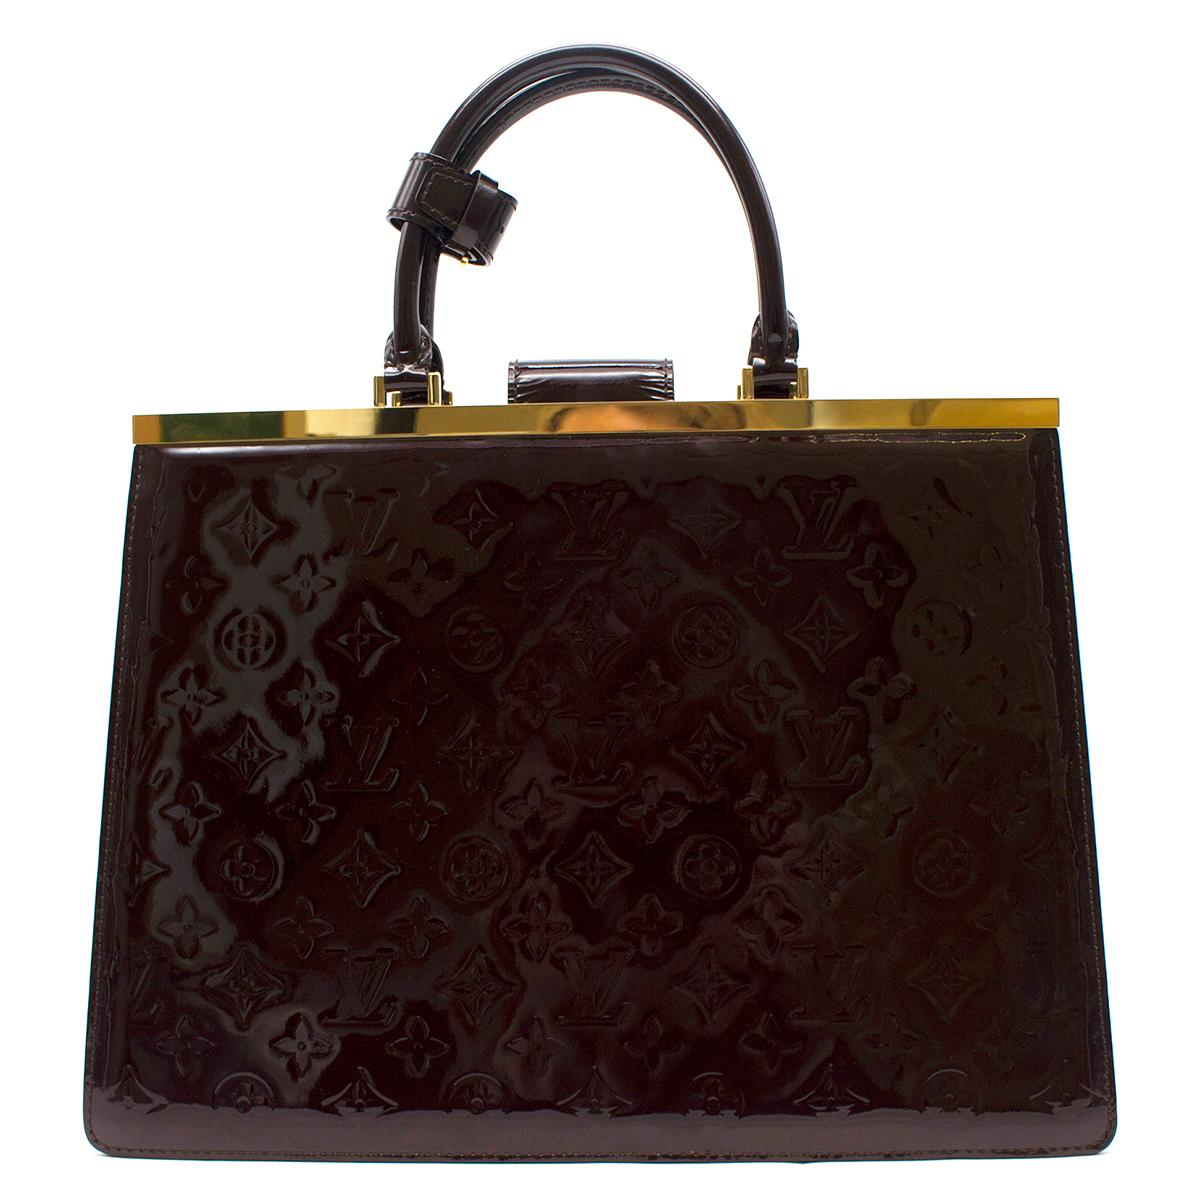 Louis Vuitton Amarante Monogram Vernis Deese GM Handbag

- Amarante Monogram Vernis Handbag 
- Embossed Patent Leather 
- Goldtone Hardware 
- Interior Pockets: Two open compartments with one central zip compartment, two flat pockets
- Double rolled